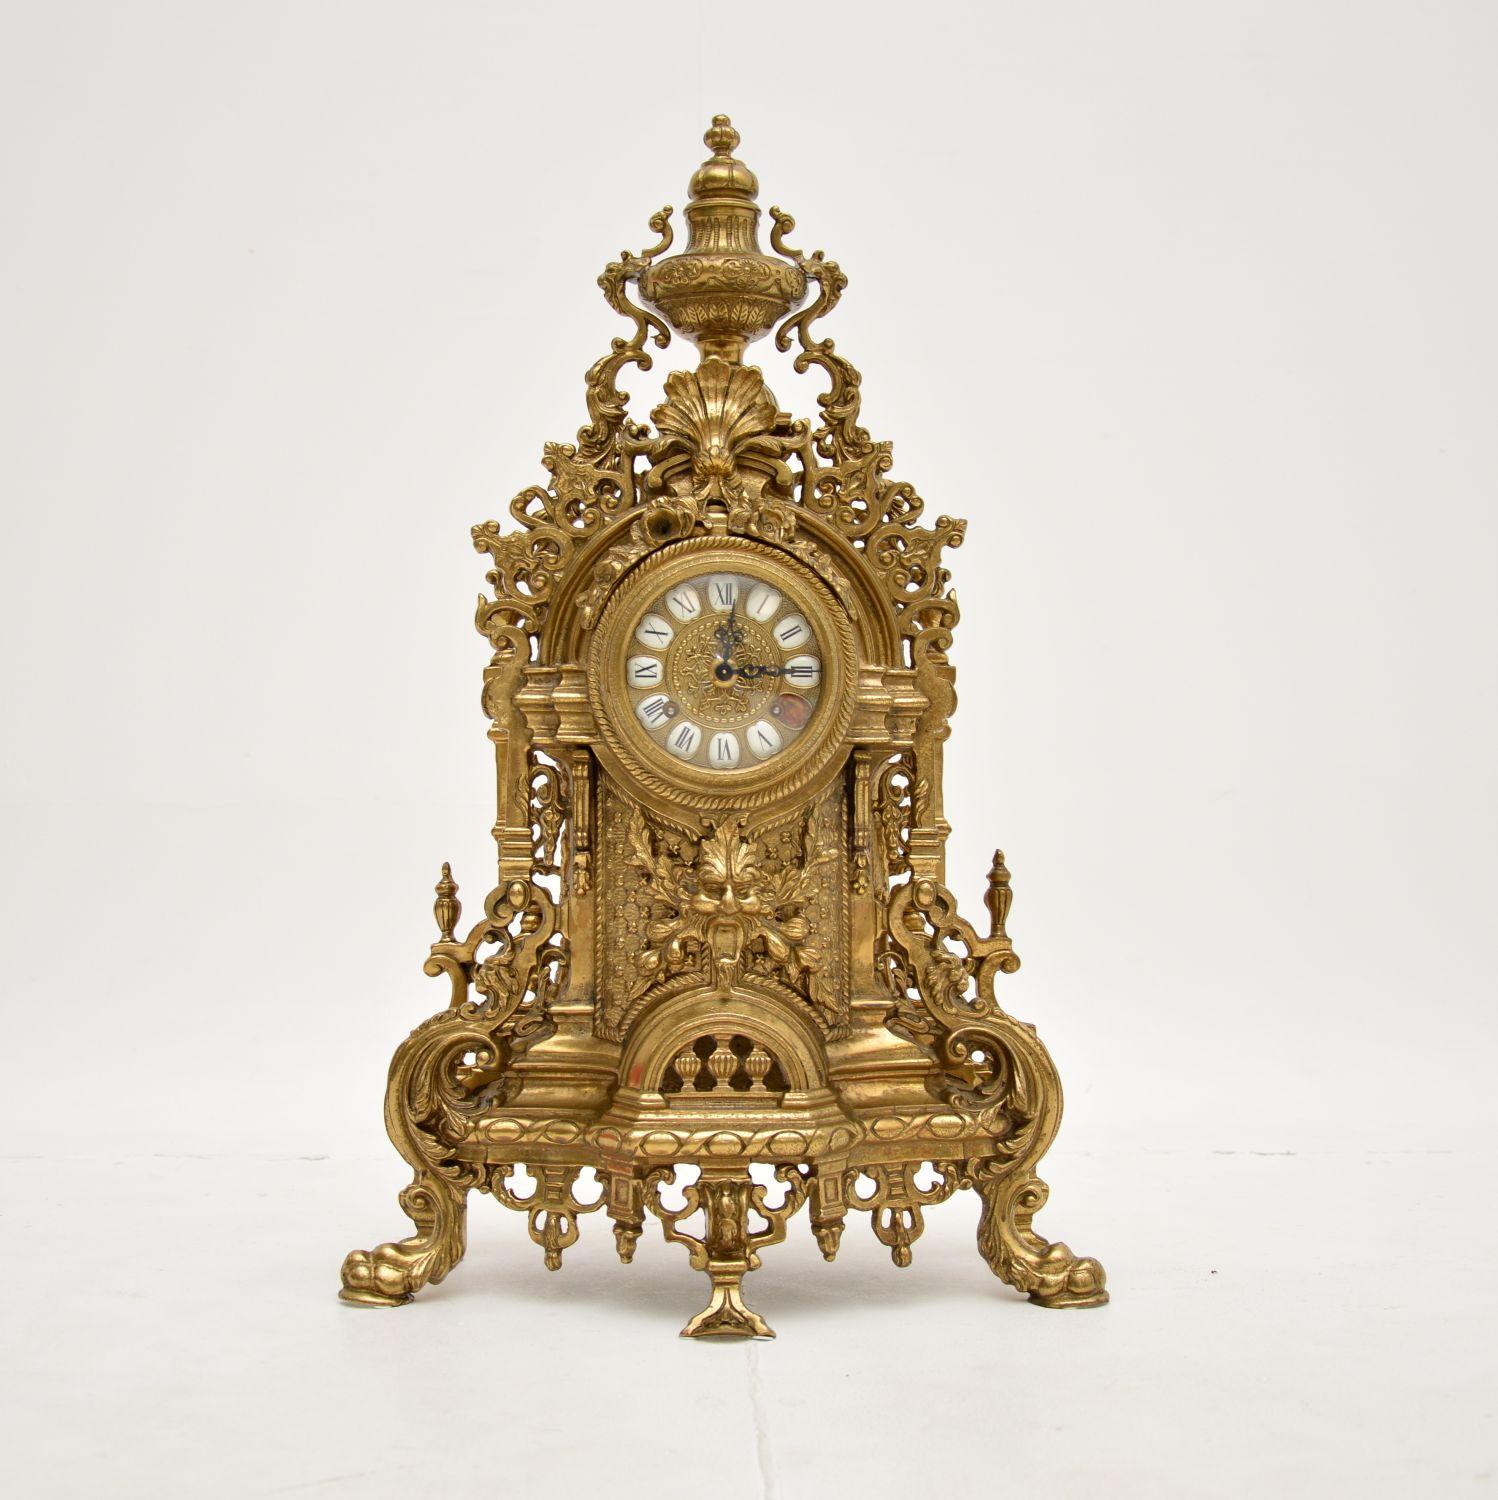 A stunning and beautifully made antique French style solid brass mantle clock. This was made by Franz Hermle in the 1960’s, the movement is German and the gorgeous brass case was made in Italy by Brevettato.

It is of superb quality, it is a large